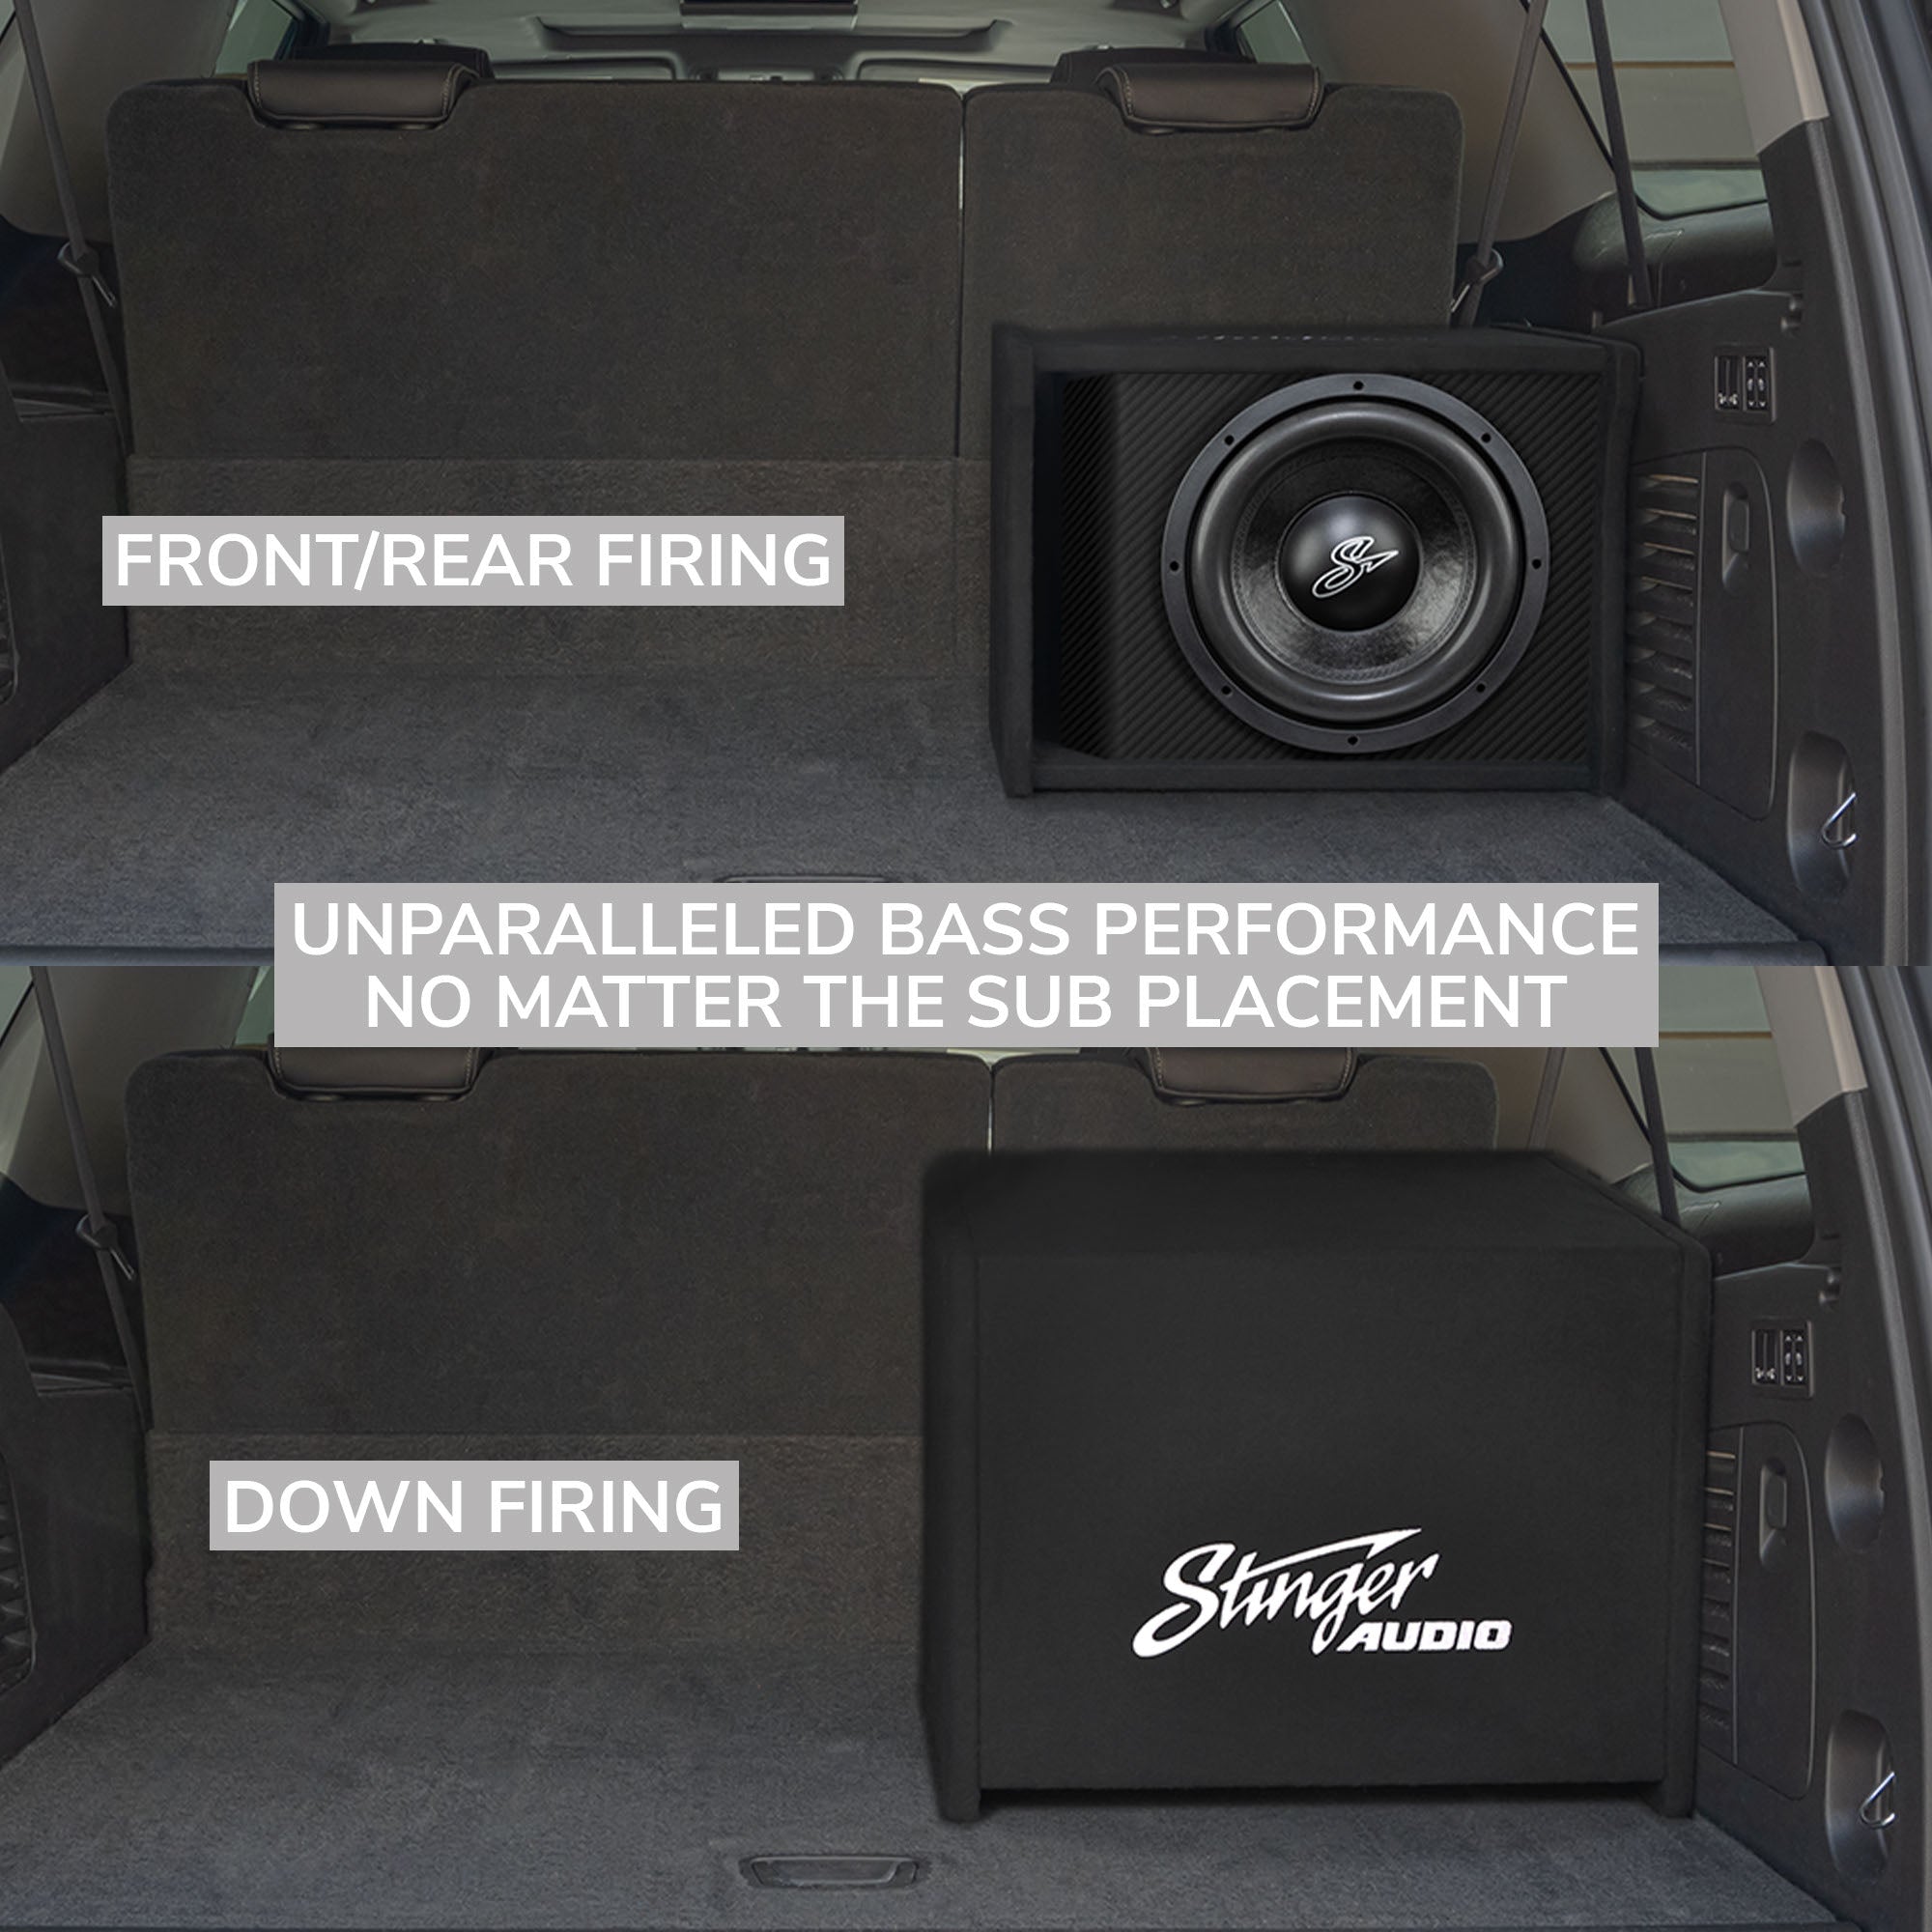 Single 10" 1,000 Watt (RMS) Loaded Ported Subwoofer Enclosure (1,000 Watts RMS/1,500 Watts Max) Bass Package with Amplifier & Complete Wiring Kit